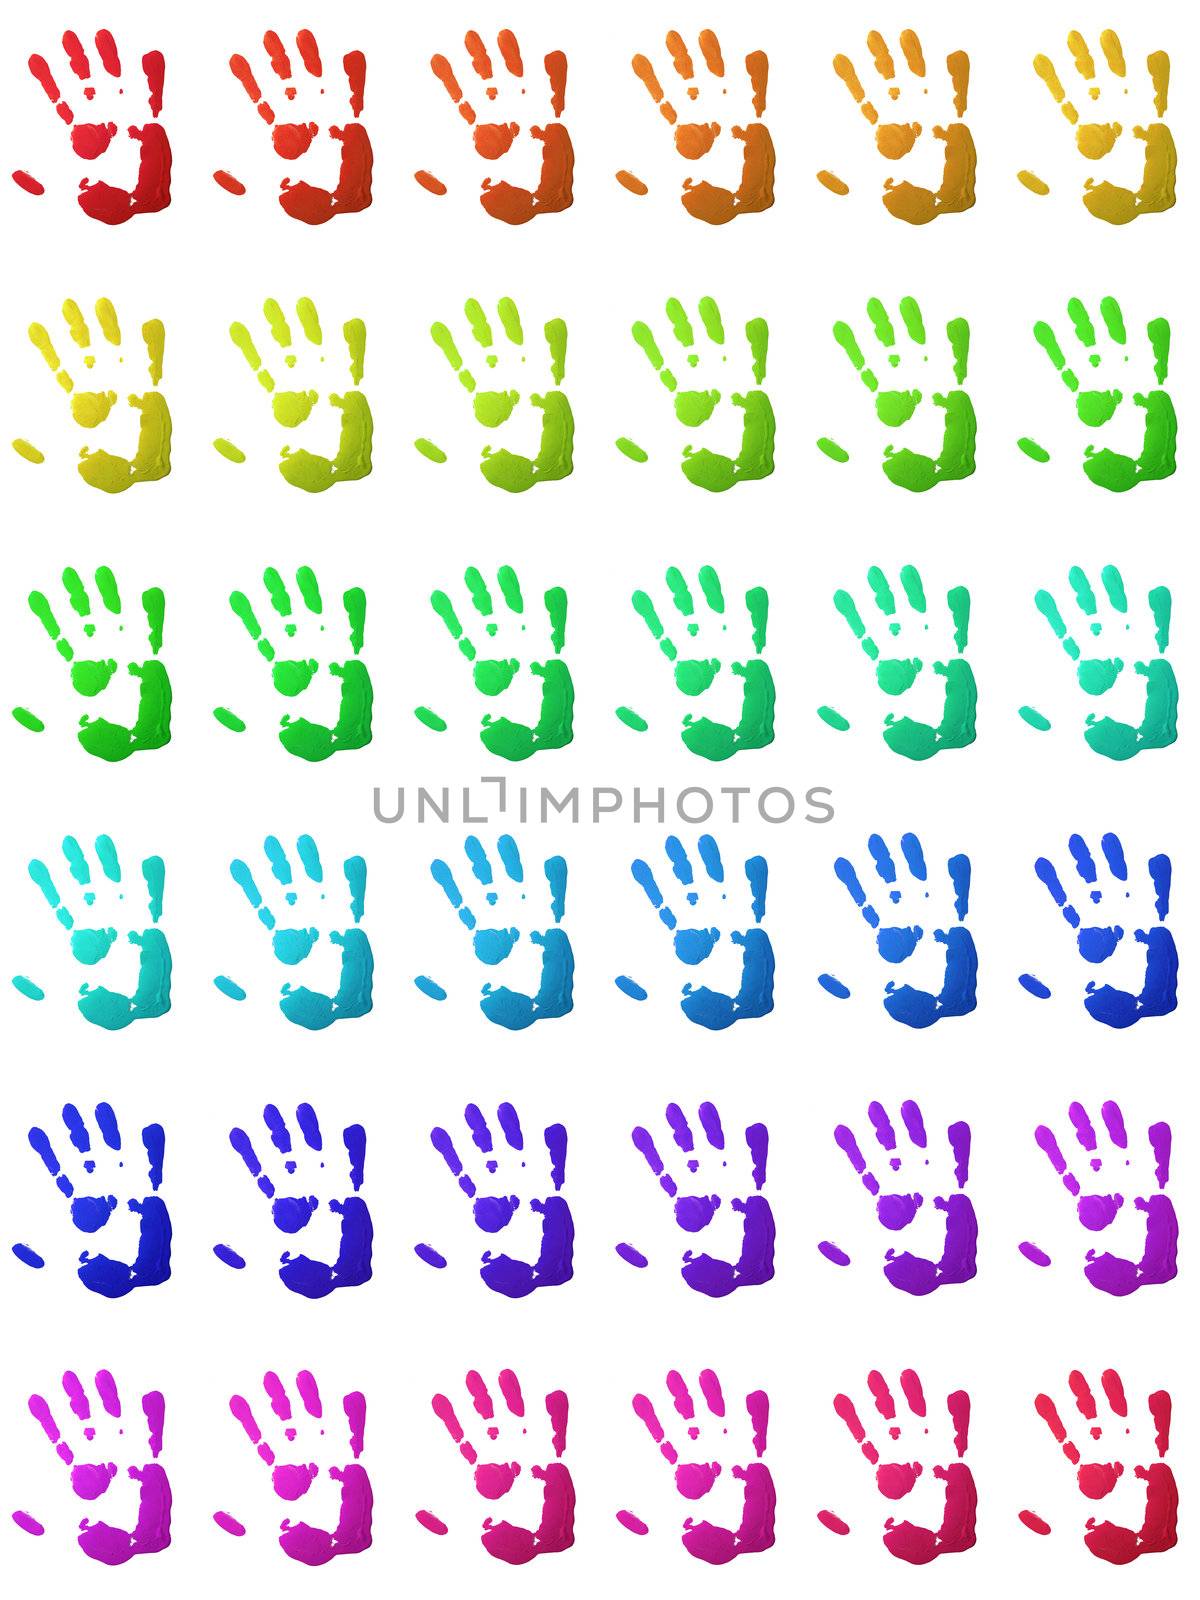 Colorful handprints by PlanctonVideo